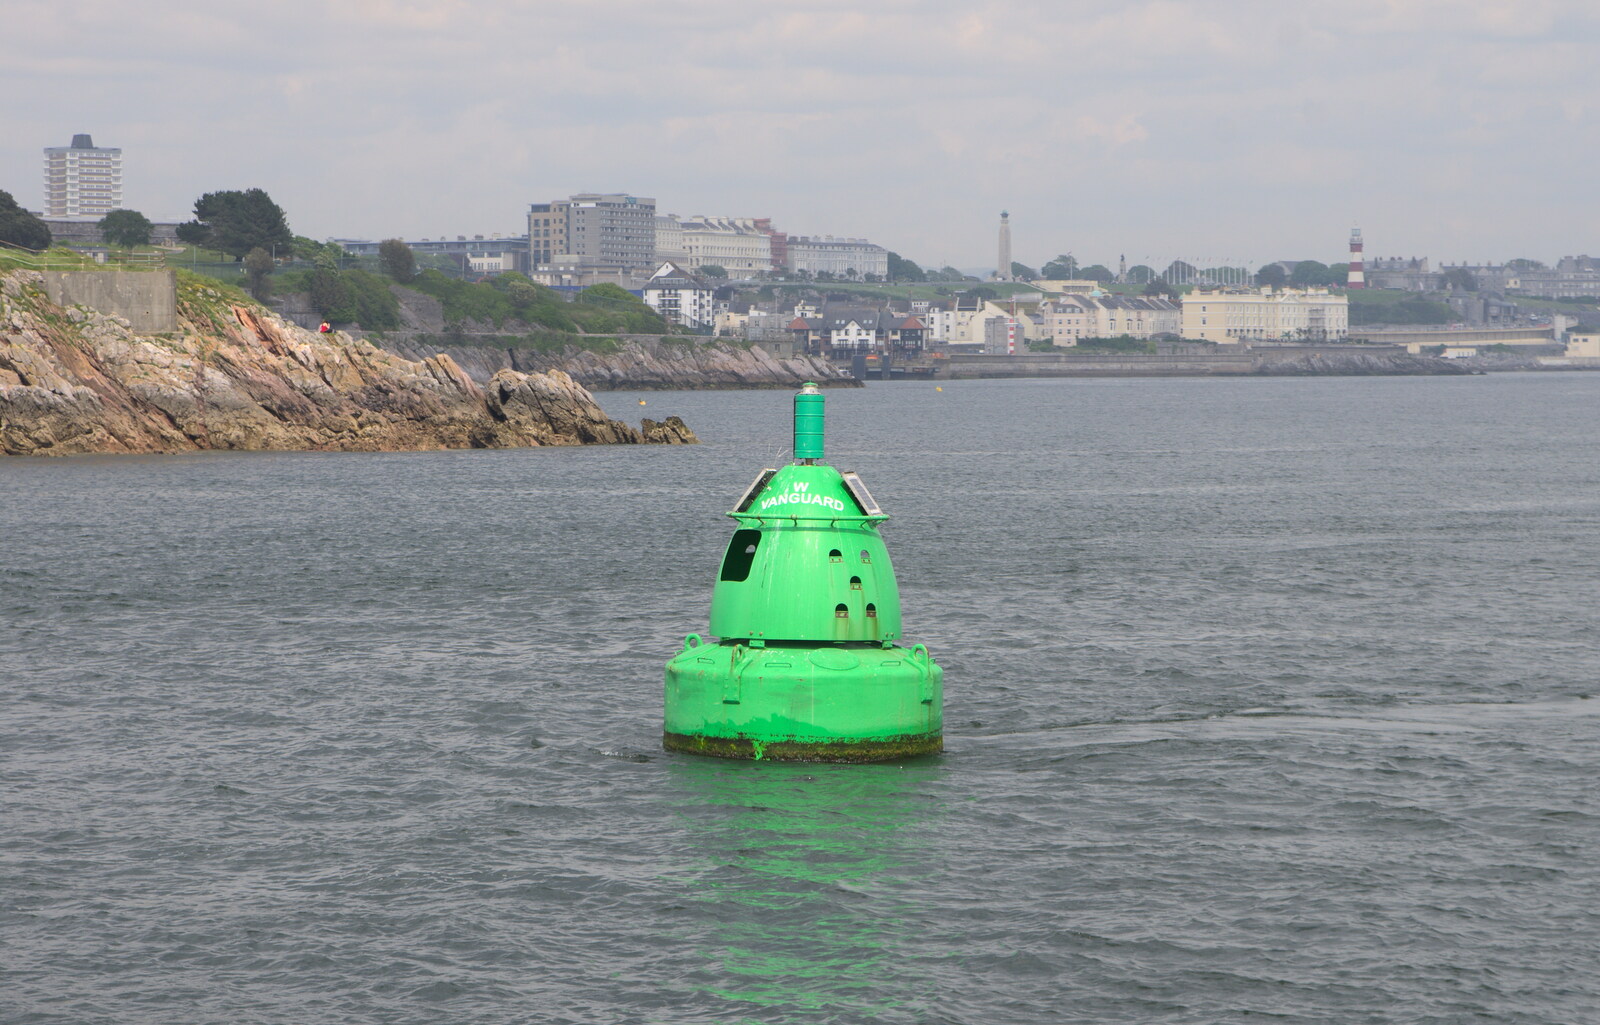 The West Vanguard navigation buoy from A Tamar River Trip, Plymouth, Devon - 30th May 2016